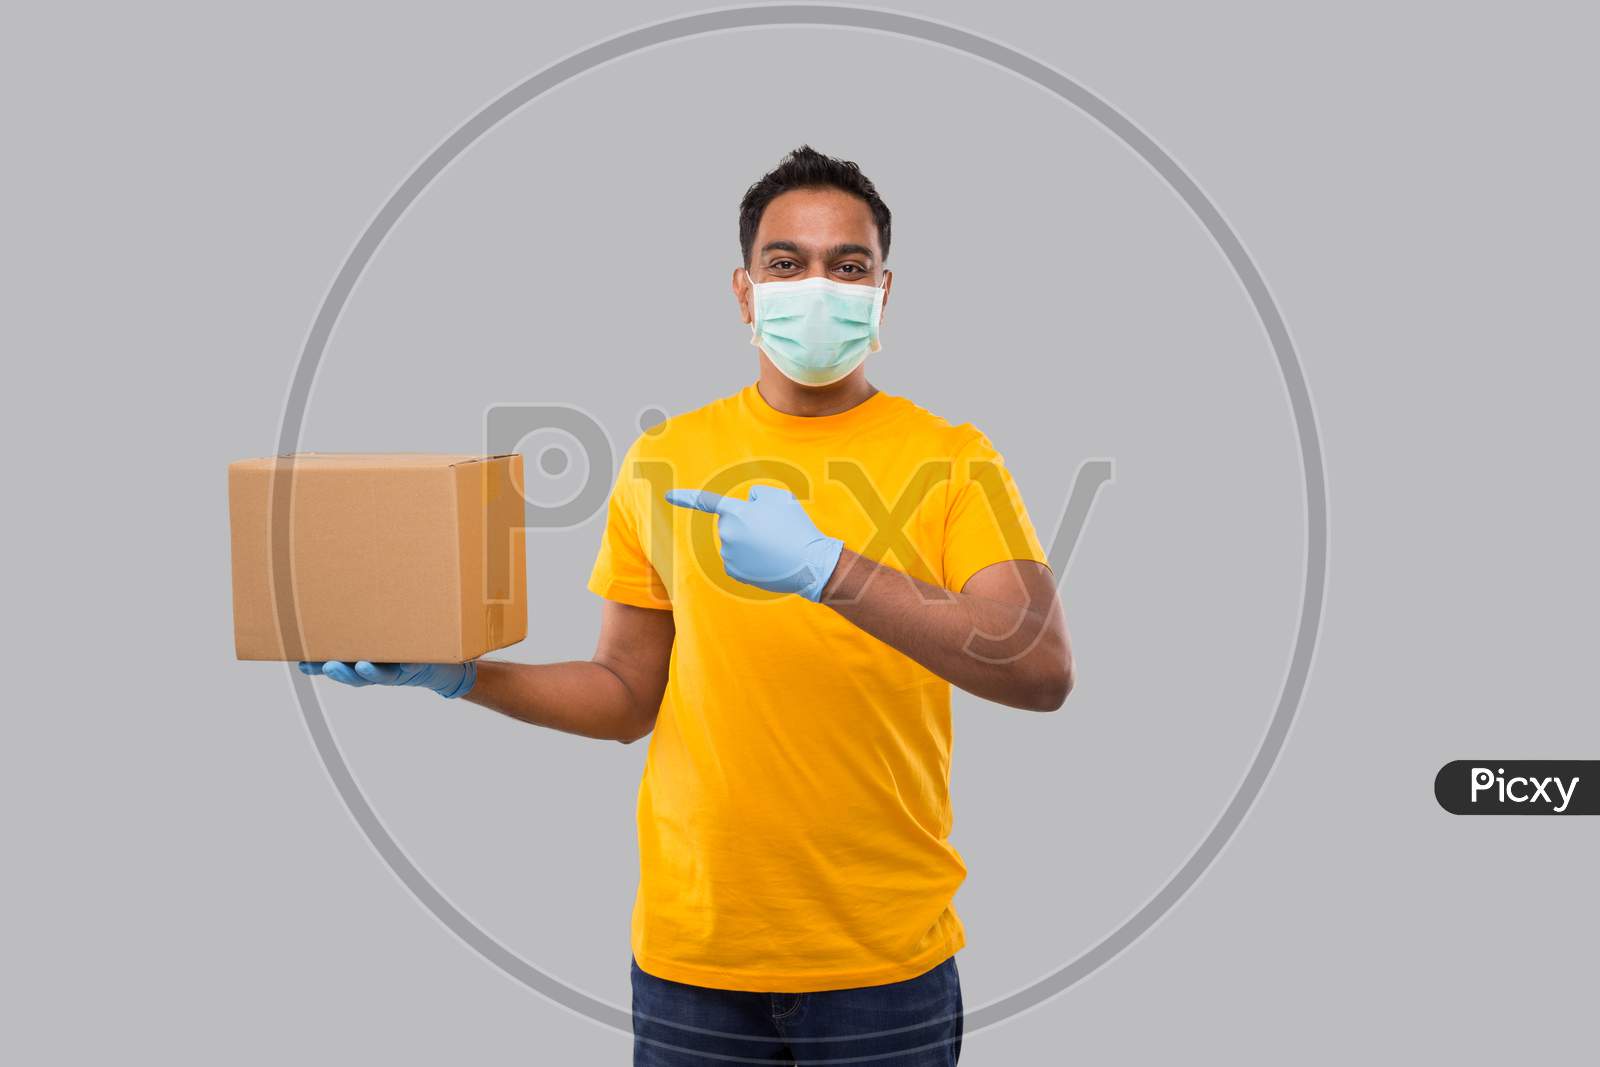 Indian Man Pointing At Box Wearing Medical Mask And Gloves Isolated. Yellow Tshirt Delivery Boy. Home Delivery. Quarantine Hero.